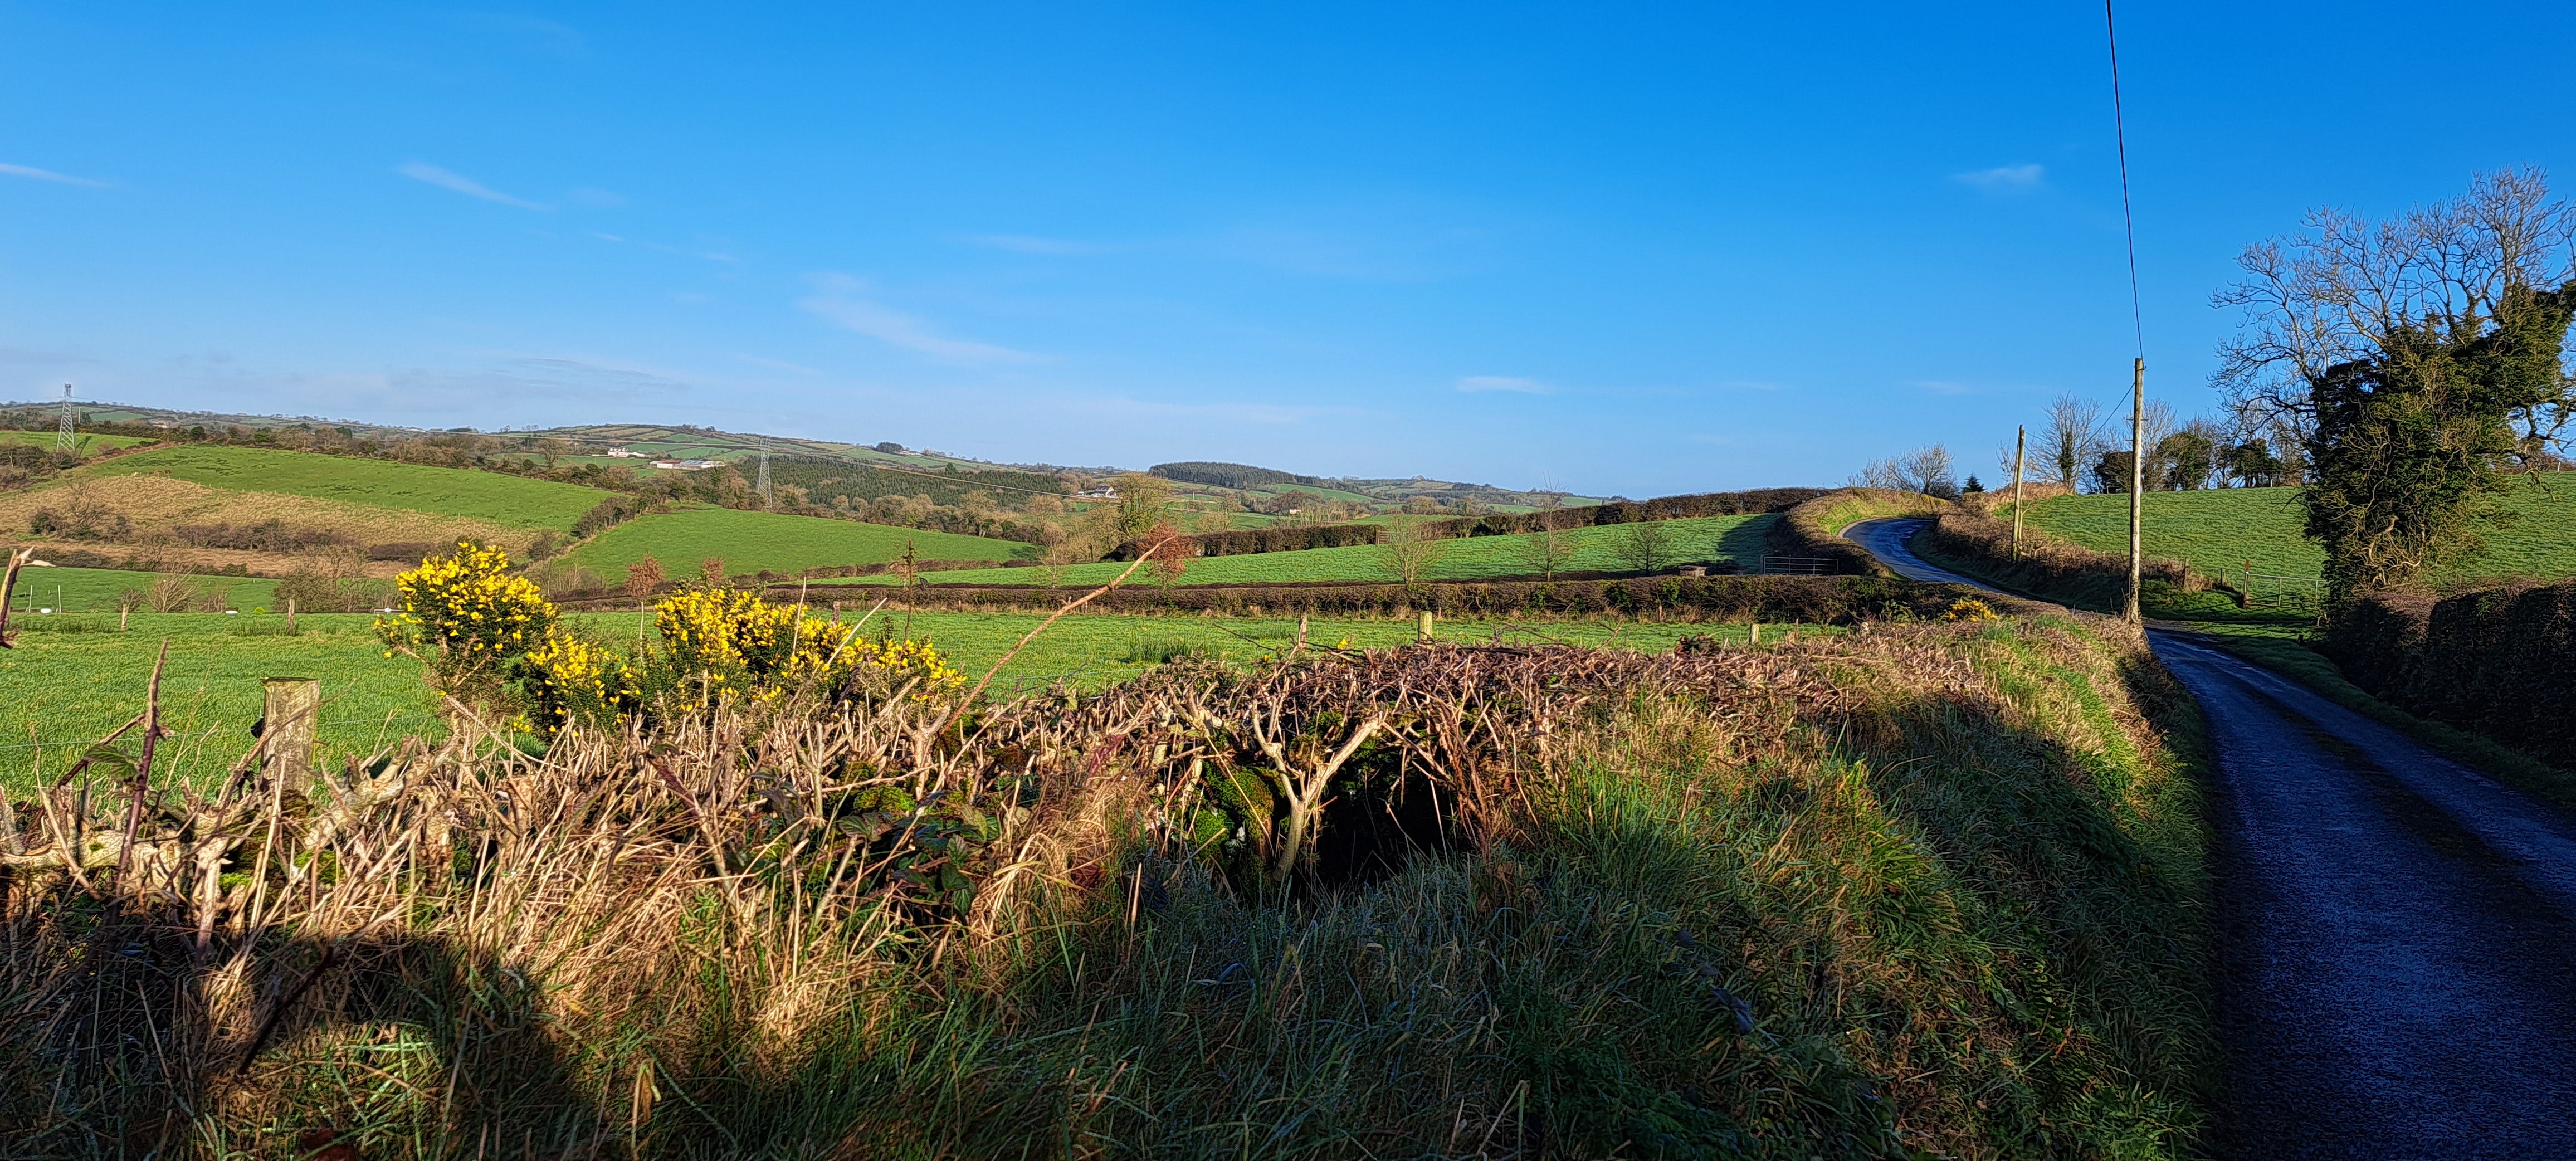 Landscape of low rolling hills, vibrant green, and clear blue ski, with a narrow winding country lane to the right, and field boundaries marked by criss-crossing hedges. In the foreground is a lone gorse bush which has burst into golden bloom.